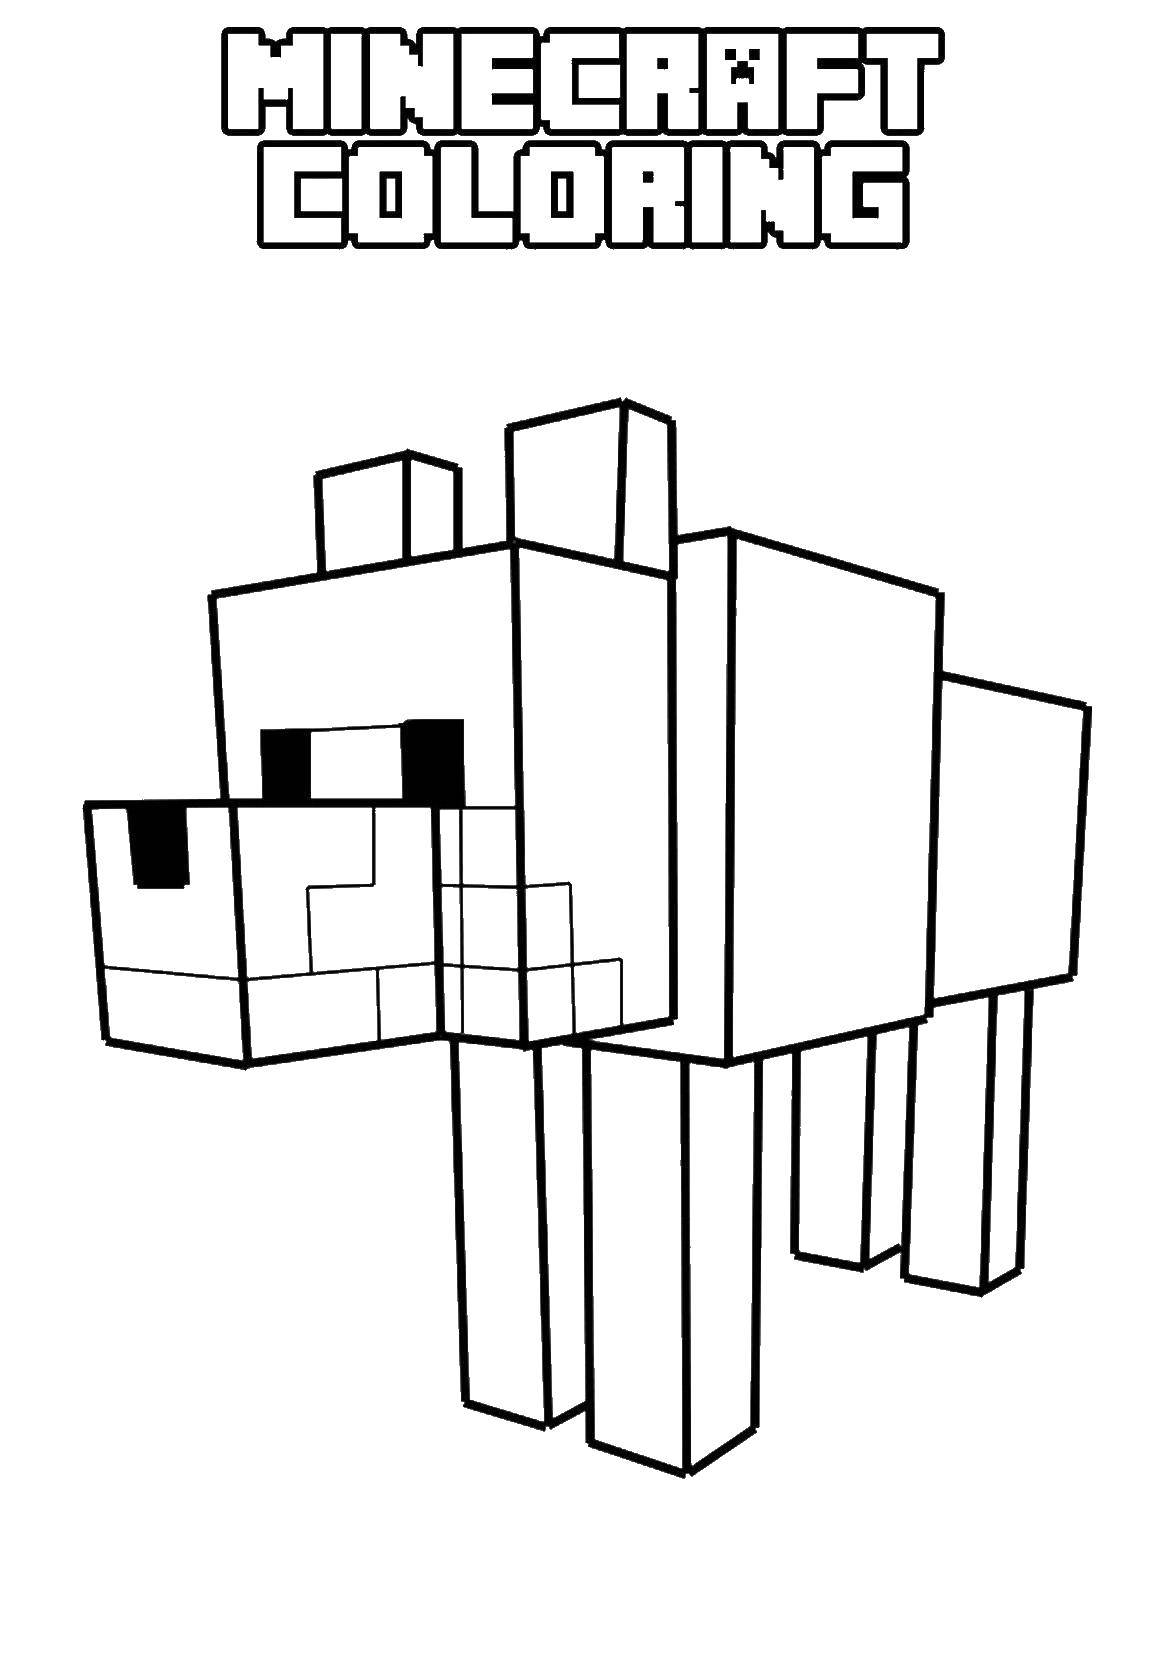 Coloring Minecraft wolf. Category minecraft. Tags:  minecraft, wolf.